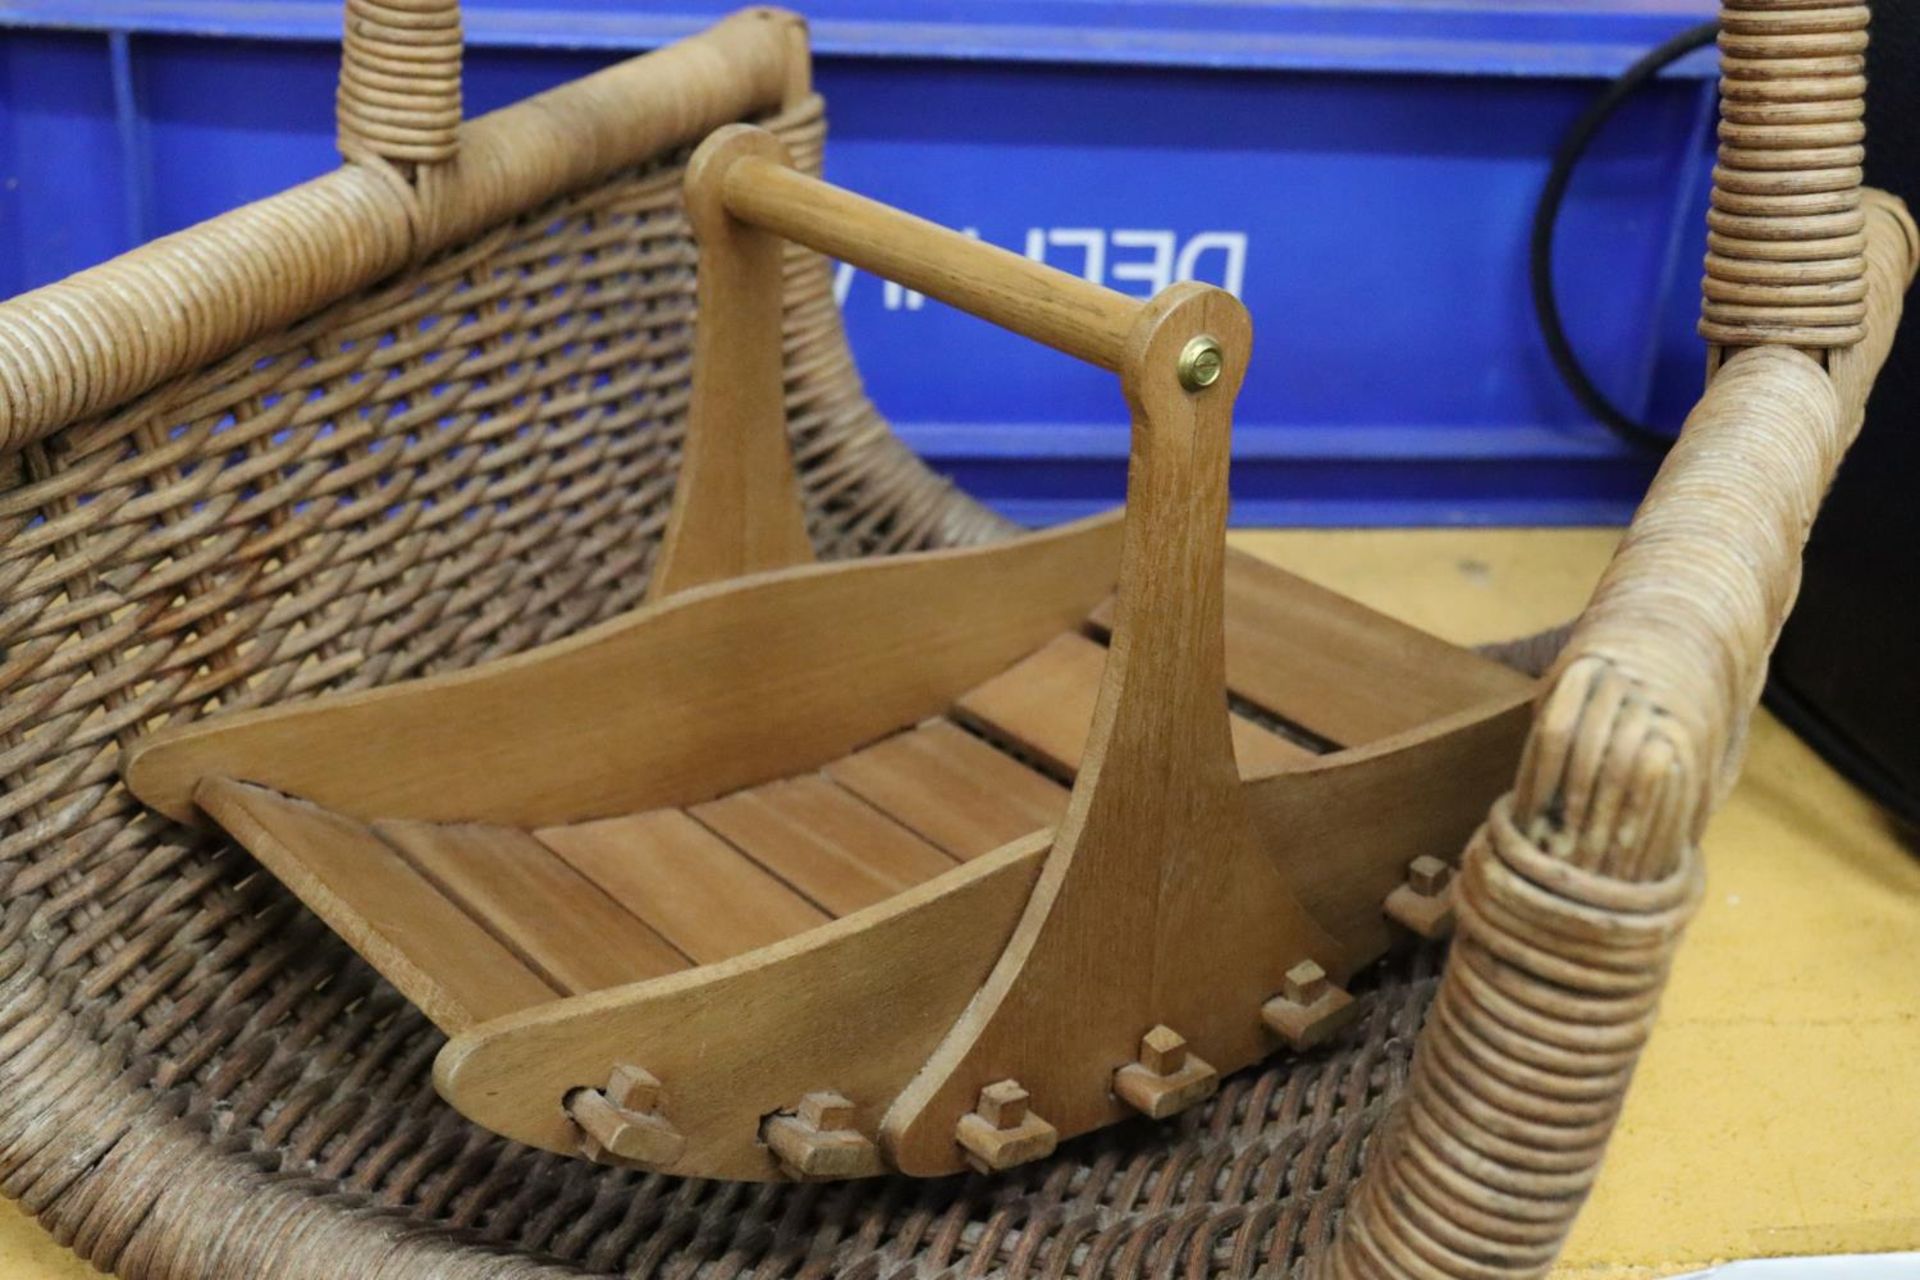 A LARGE BASKET TRUG AND A SMALLER WOODEN ONE - Image 3 of 5